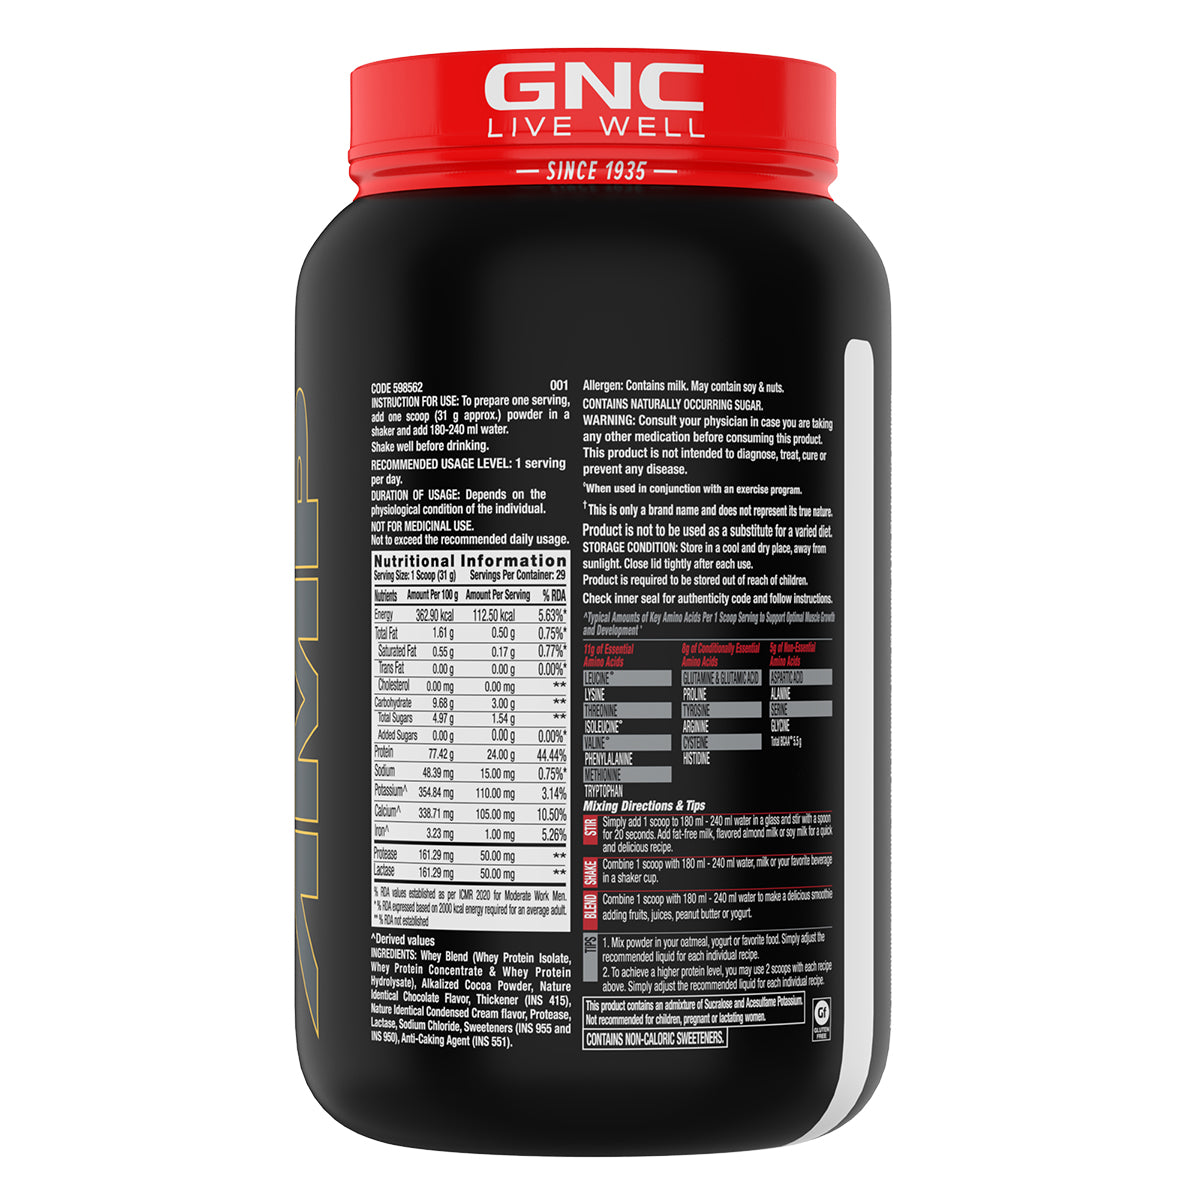 GNC AMP Gold Series 100% Whey Protein Advanced - Boosts Muscle Gains, Recovery & Workout Performance | Informed Choice Certified